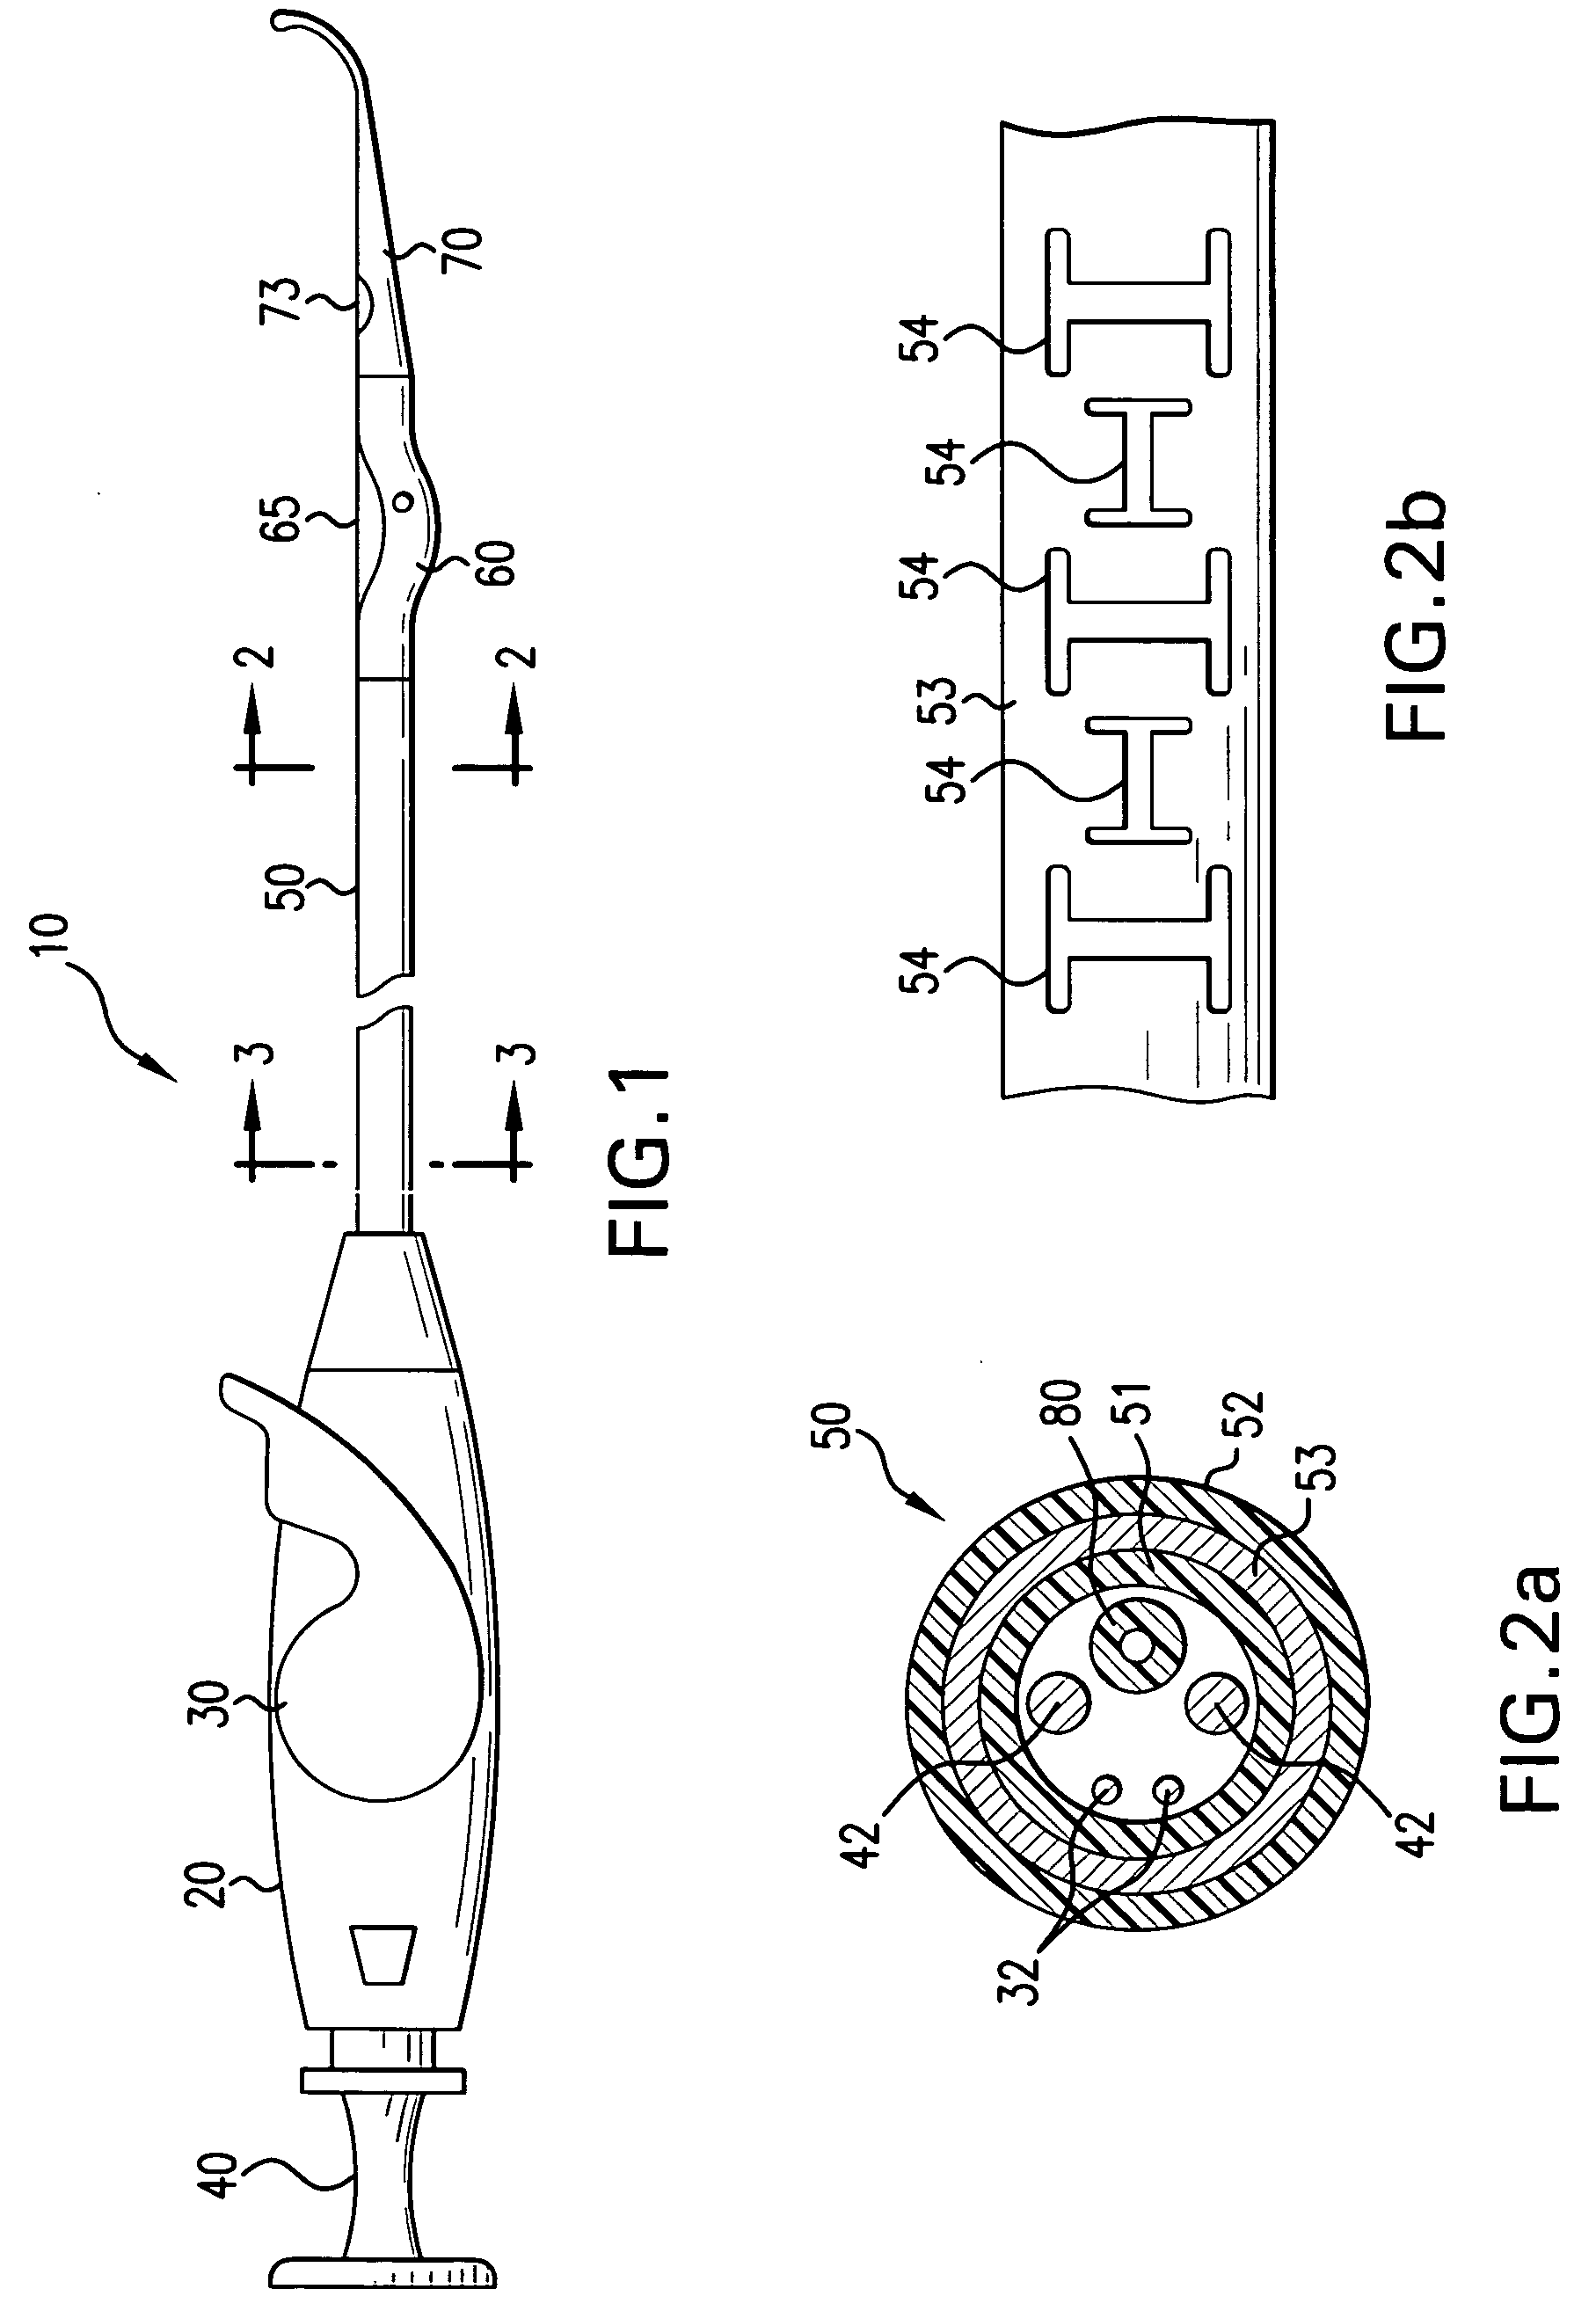 Device and method for suturing intracardiac defects